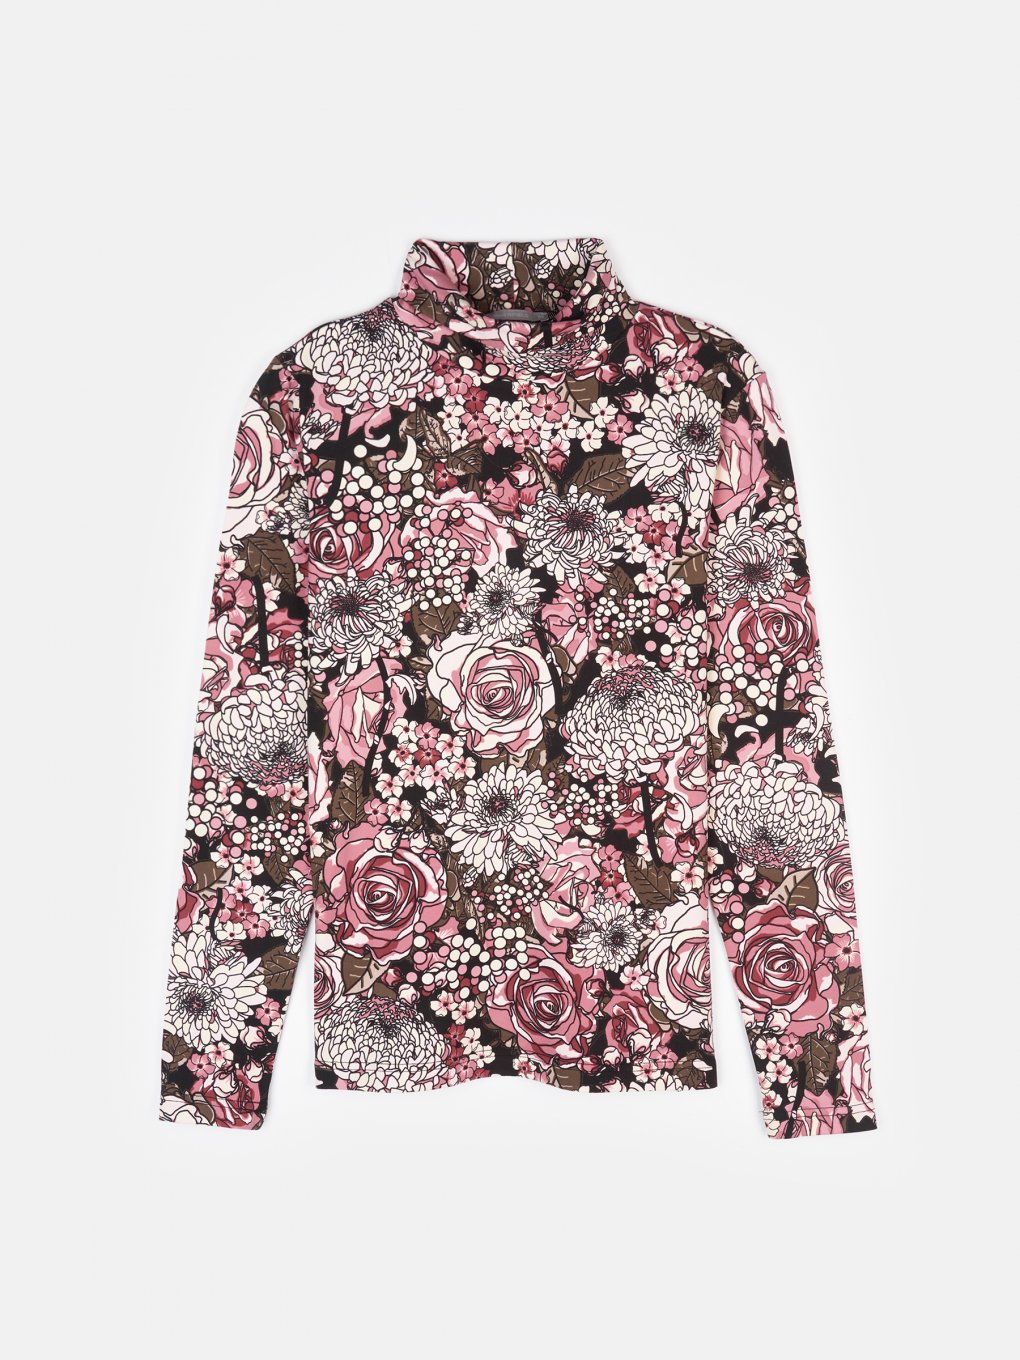 Soft roll neck with floral print